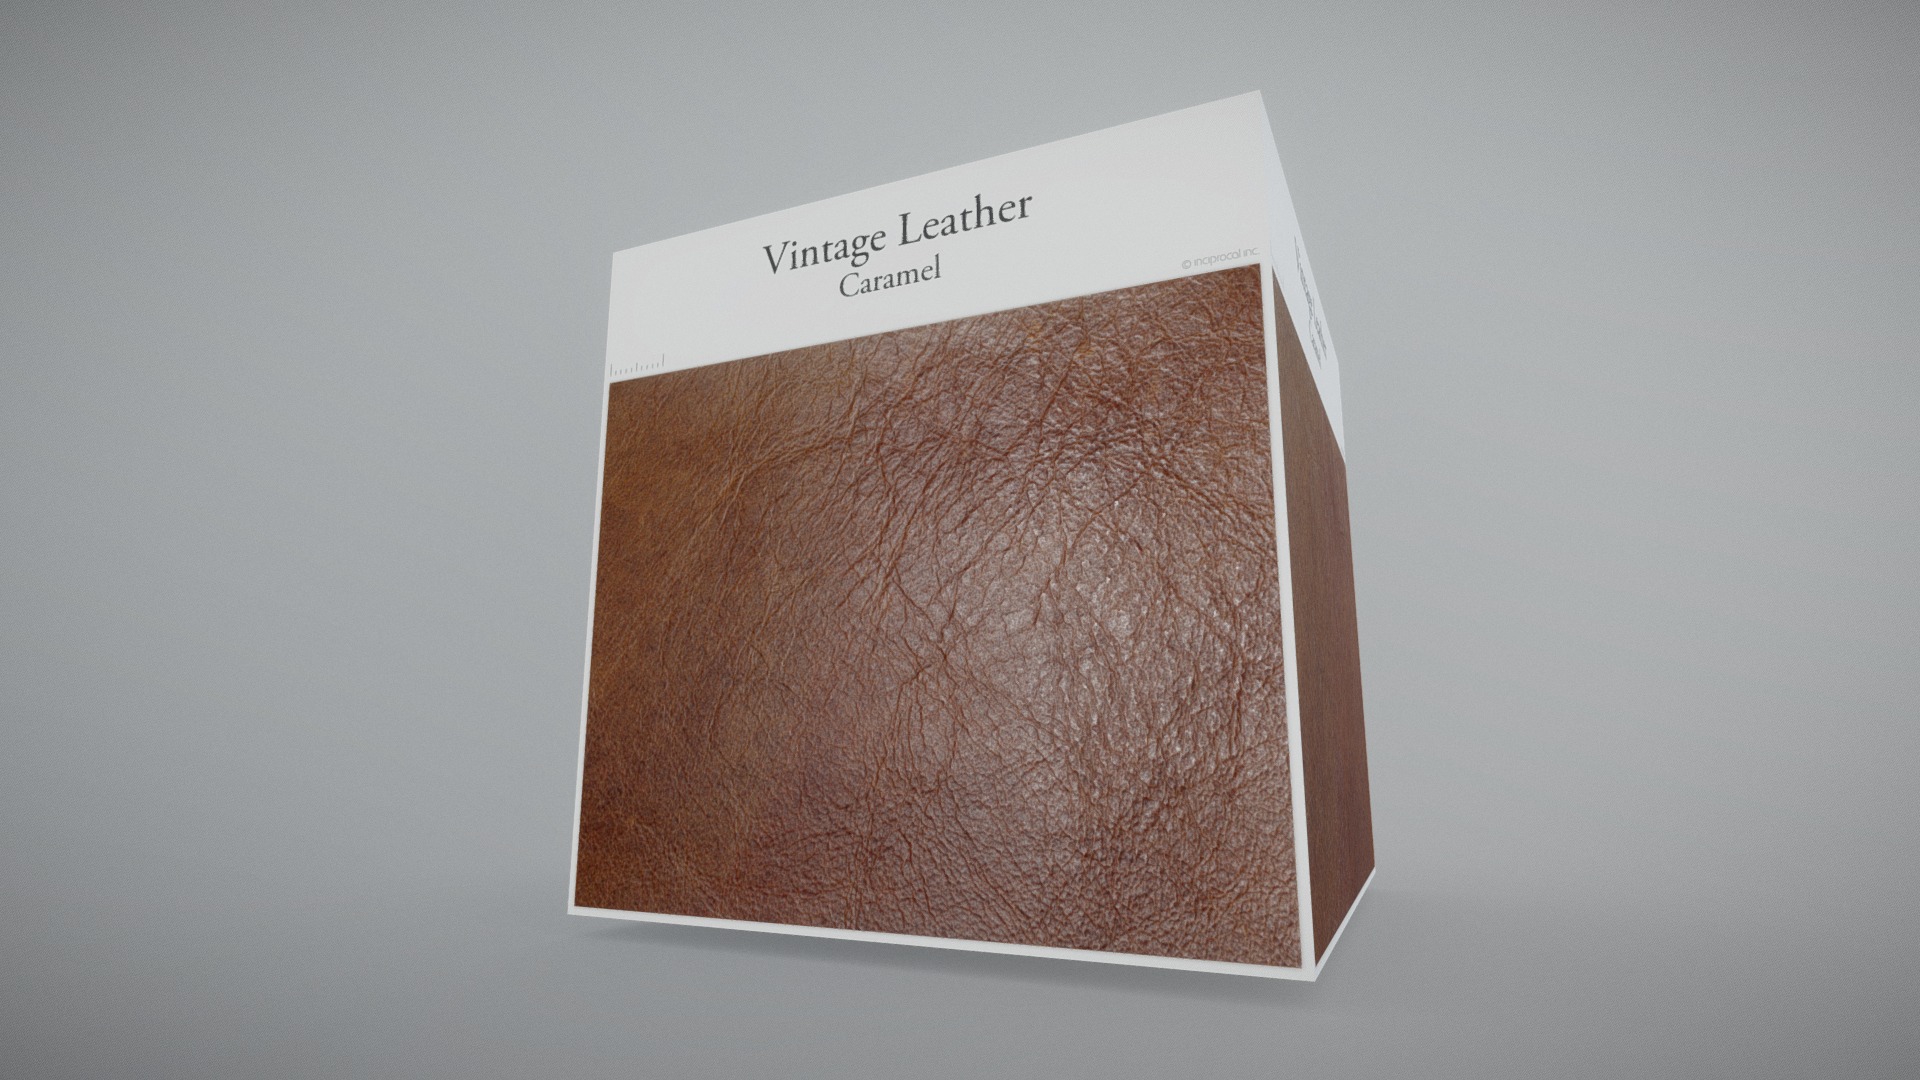 3D model Vintage Leather (Caramel) - This is a 3D model of the Vintage Leather (Caramel). The 3D model is about a white box with black text.